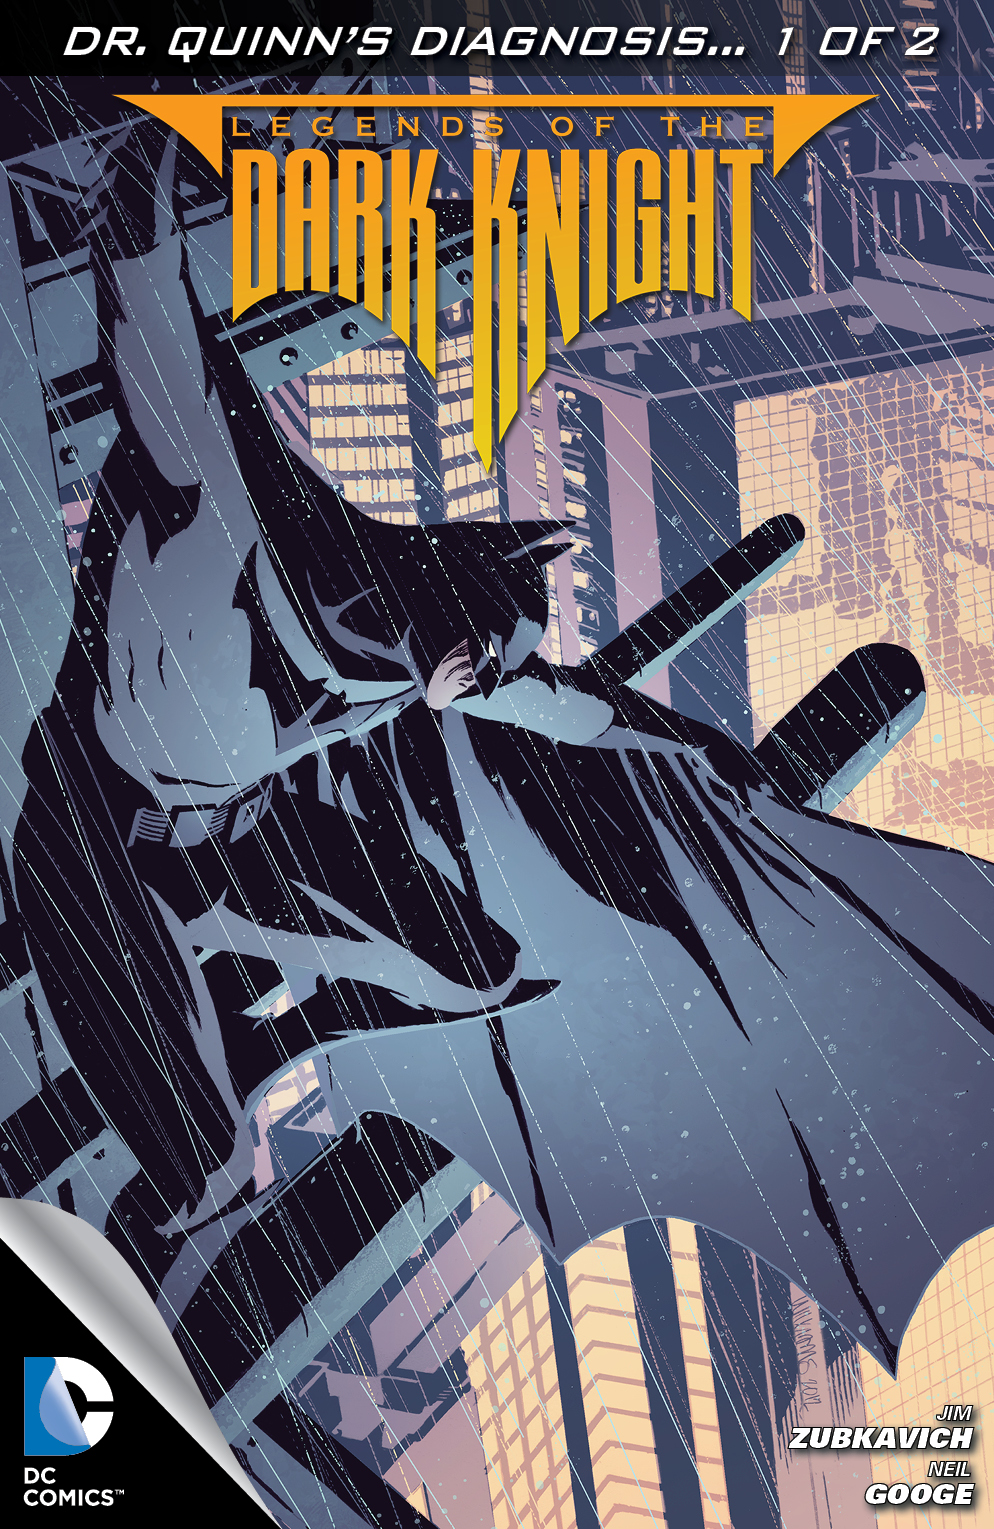 Legends of the Dark Knight #49 preview images